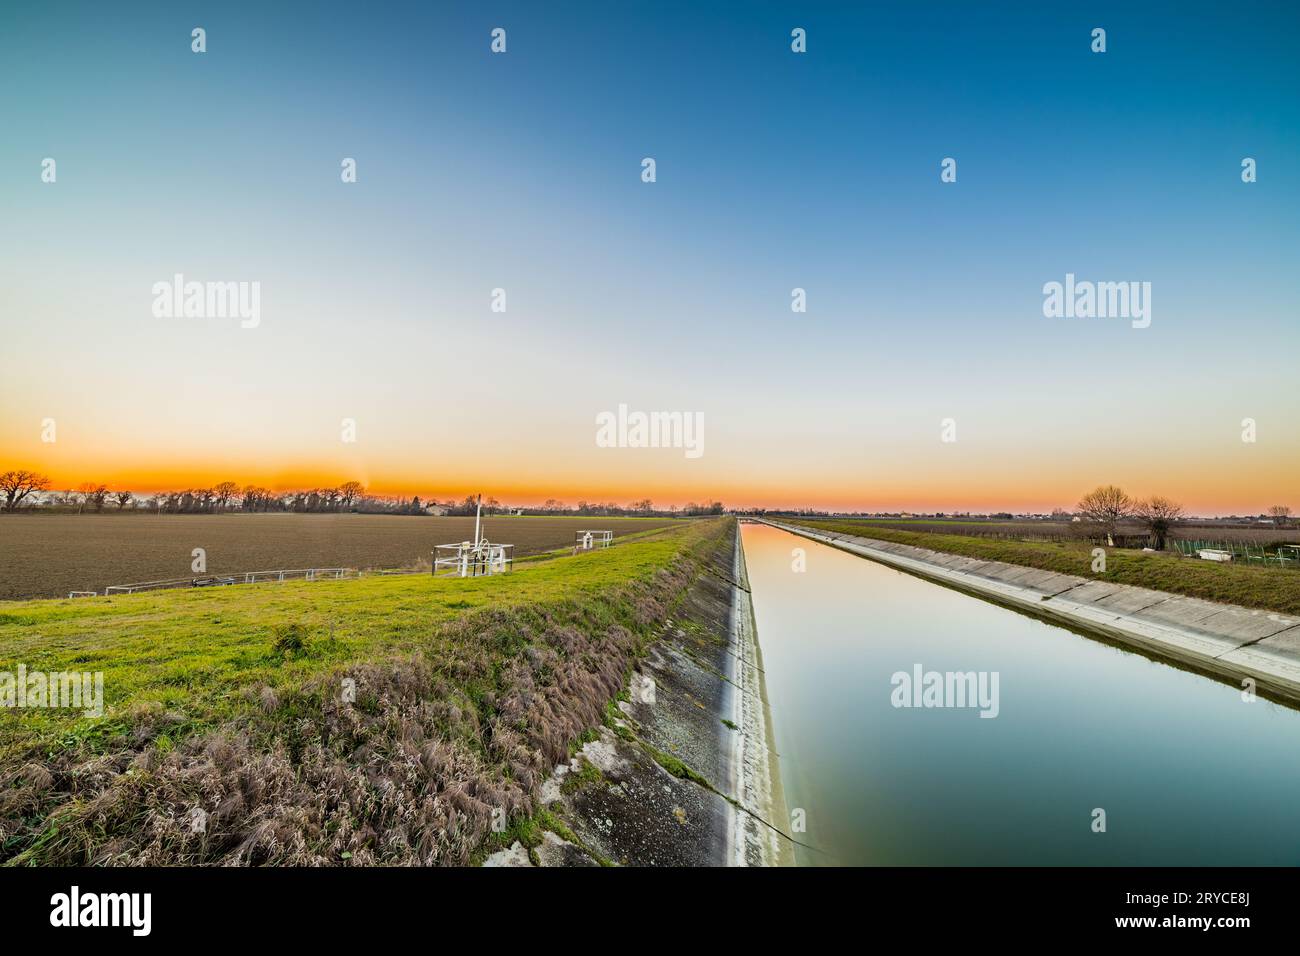 Water canal and agriculture Stock Photo